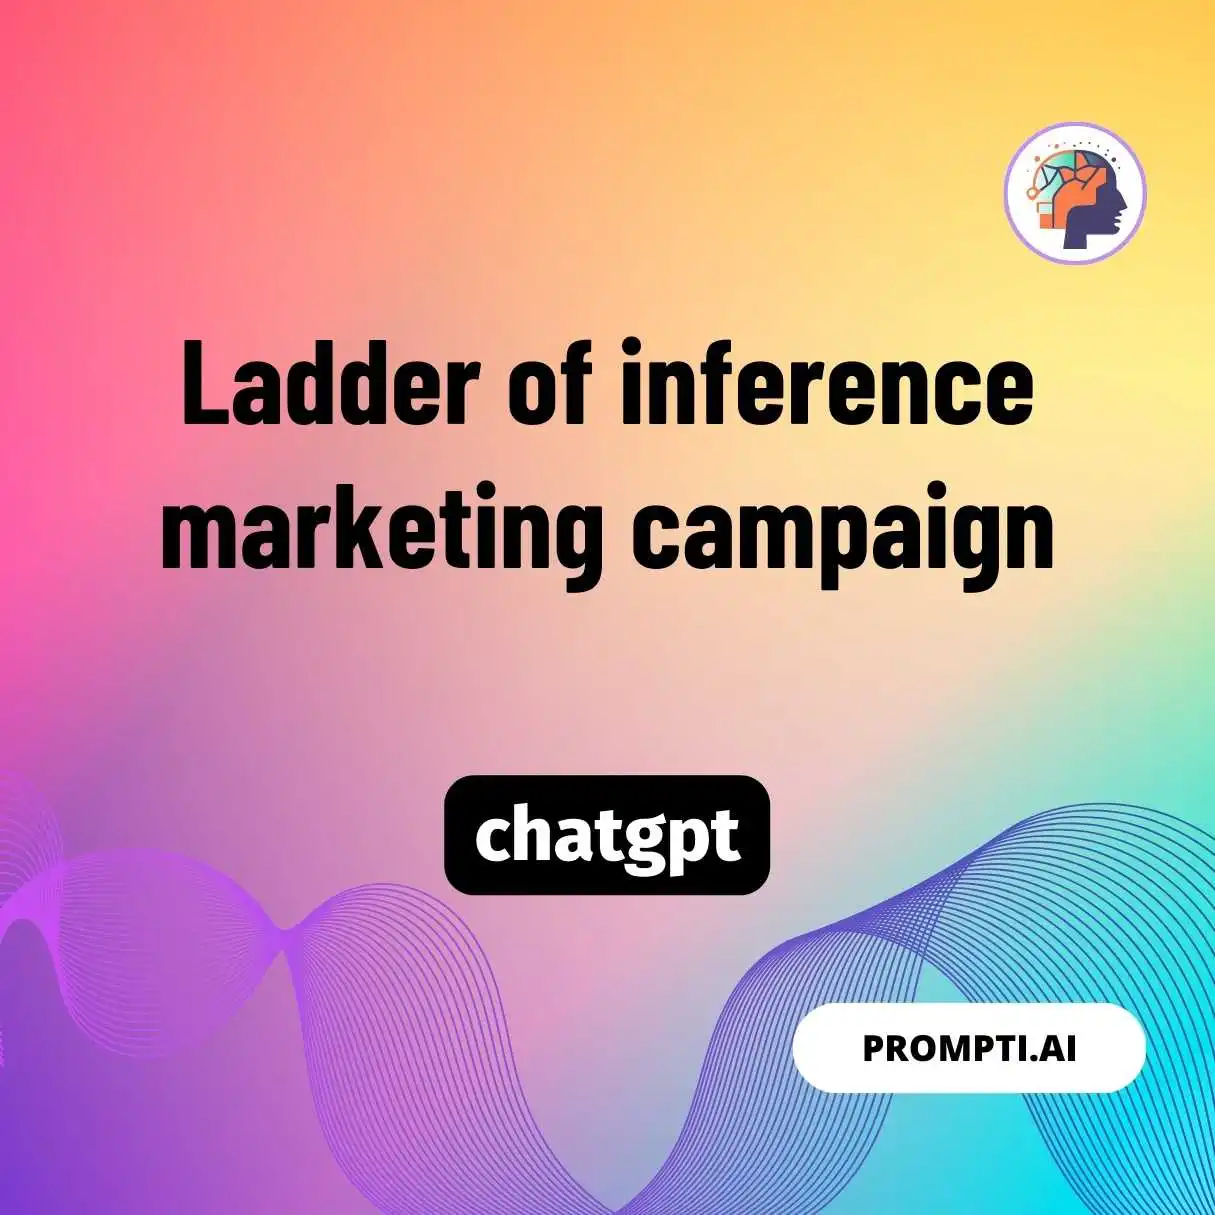 Ladder of inference marketing campaign